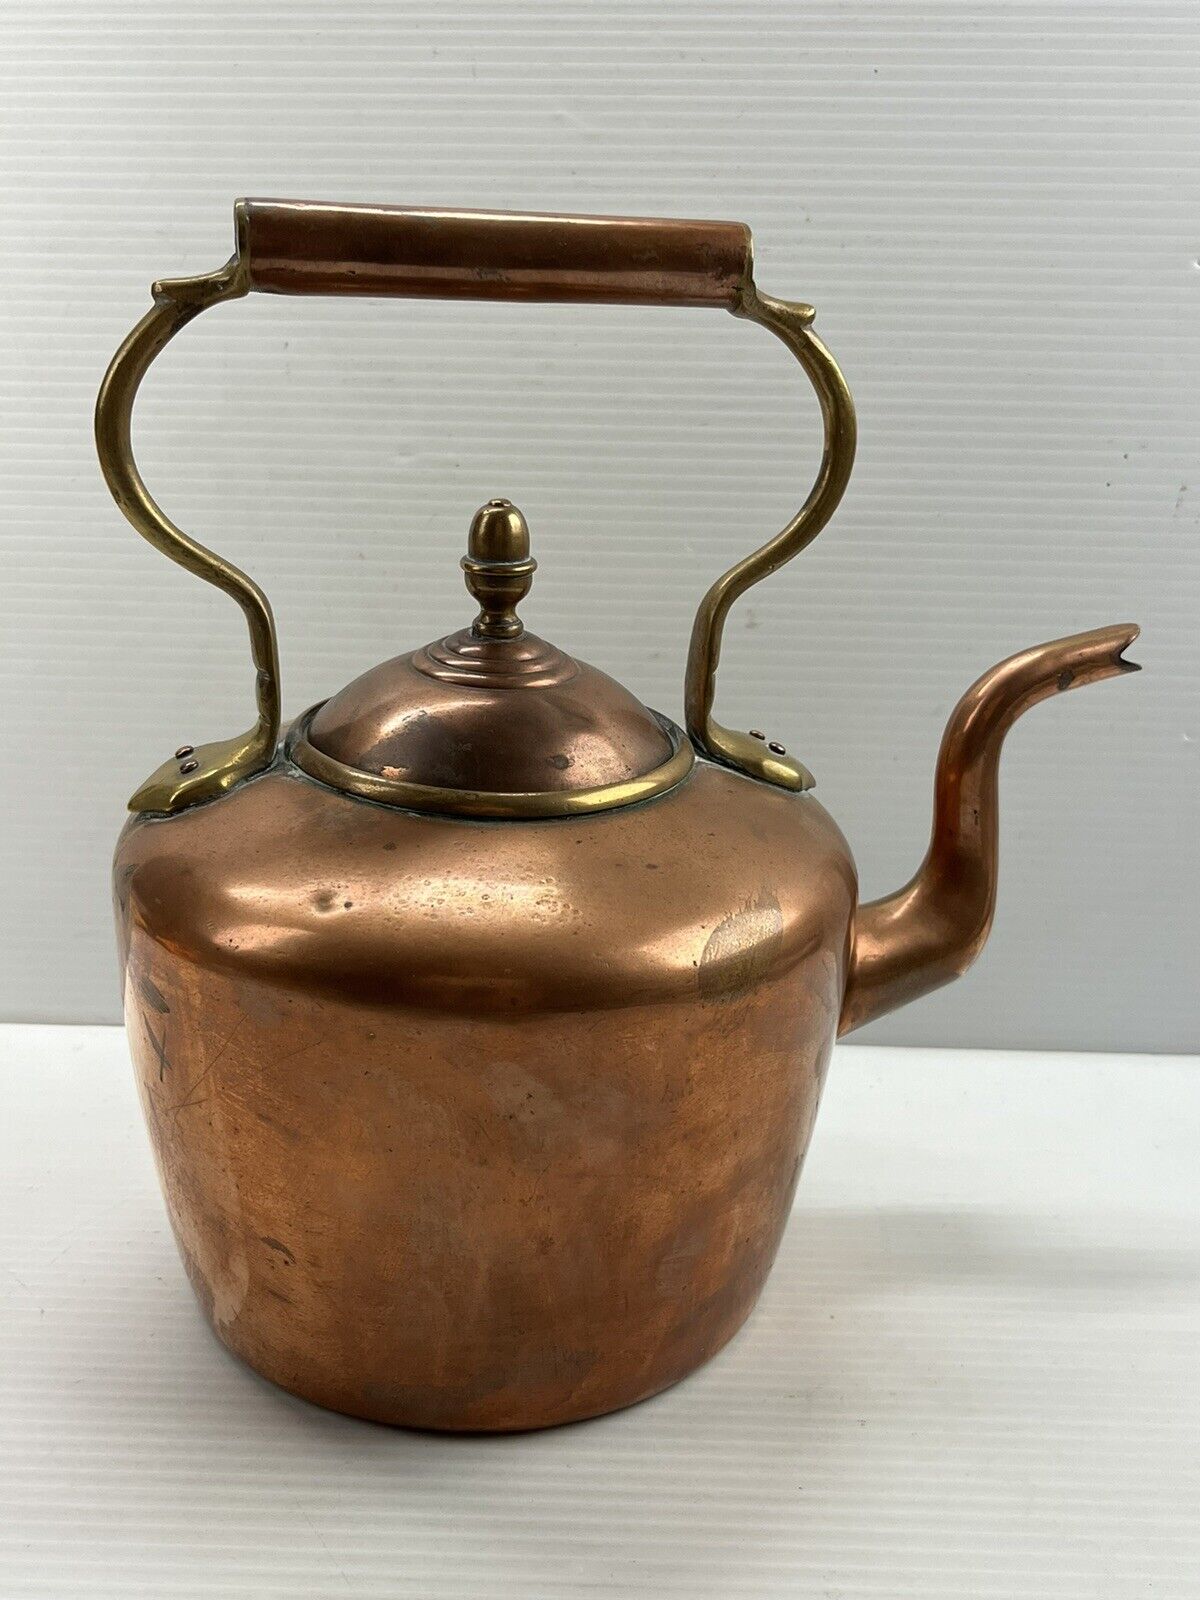 Vintage Copper Tea Kettle with Copper Handle - Heavy Handmade